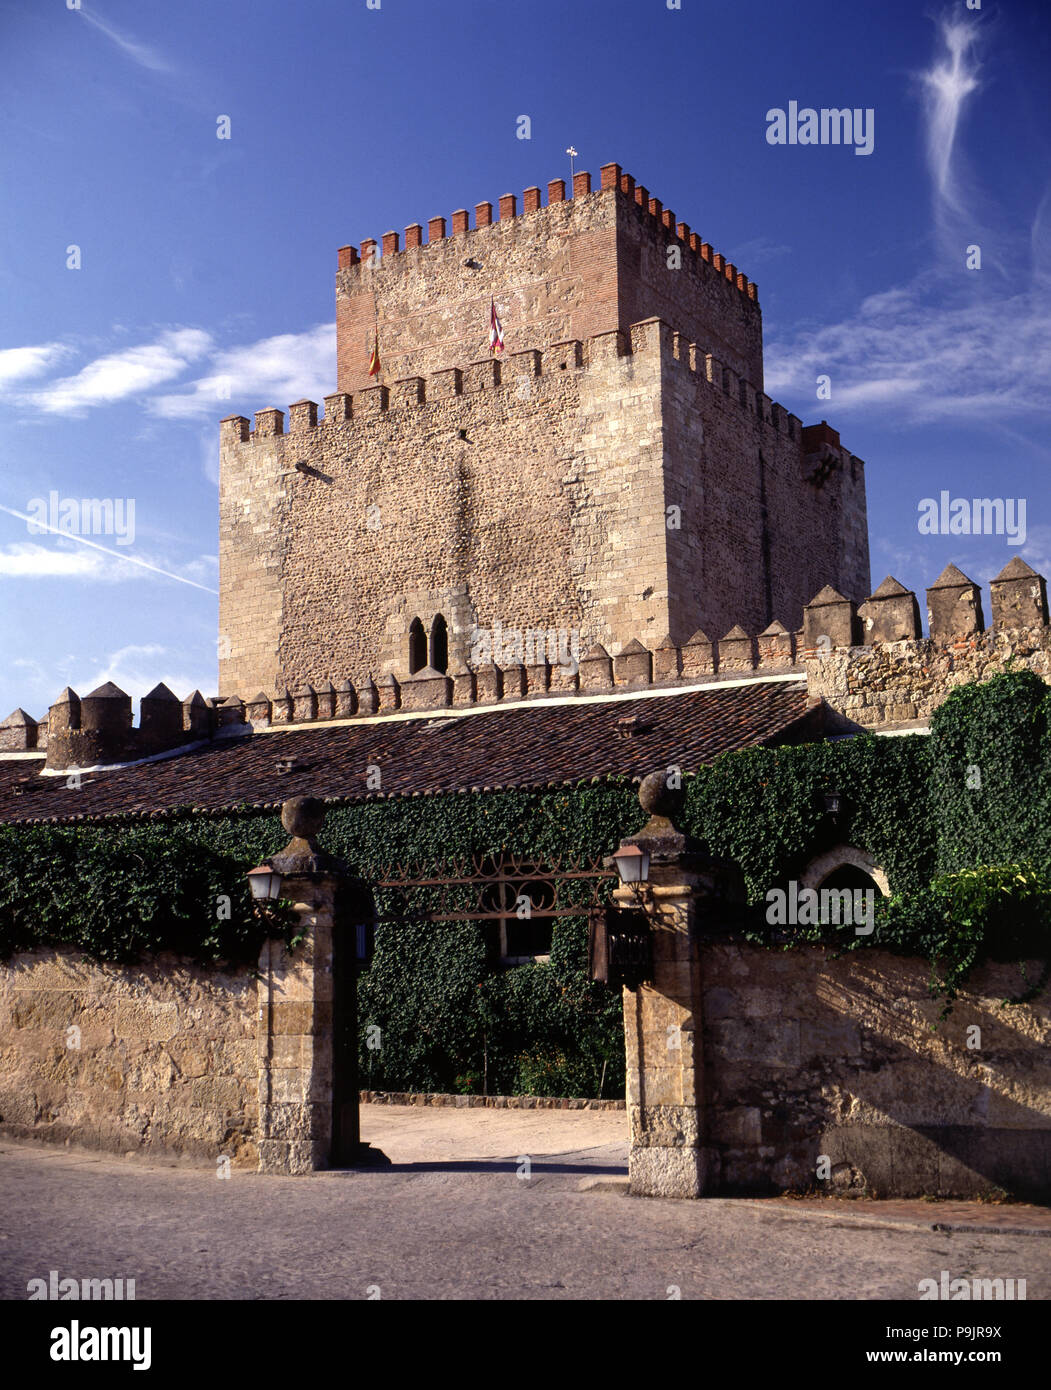 Fortress of Ciudad Rodrigo, built in 1372 by King Henry II of Castile, is currently a Parador hotel. Stock Photo